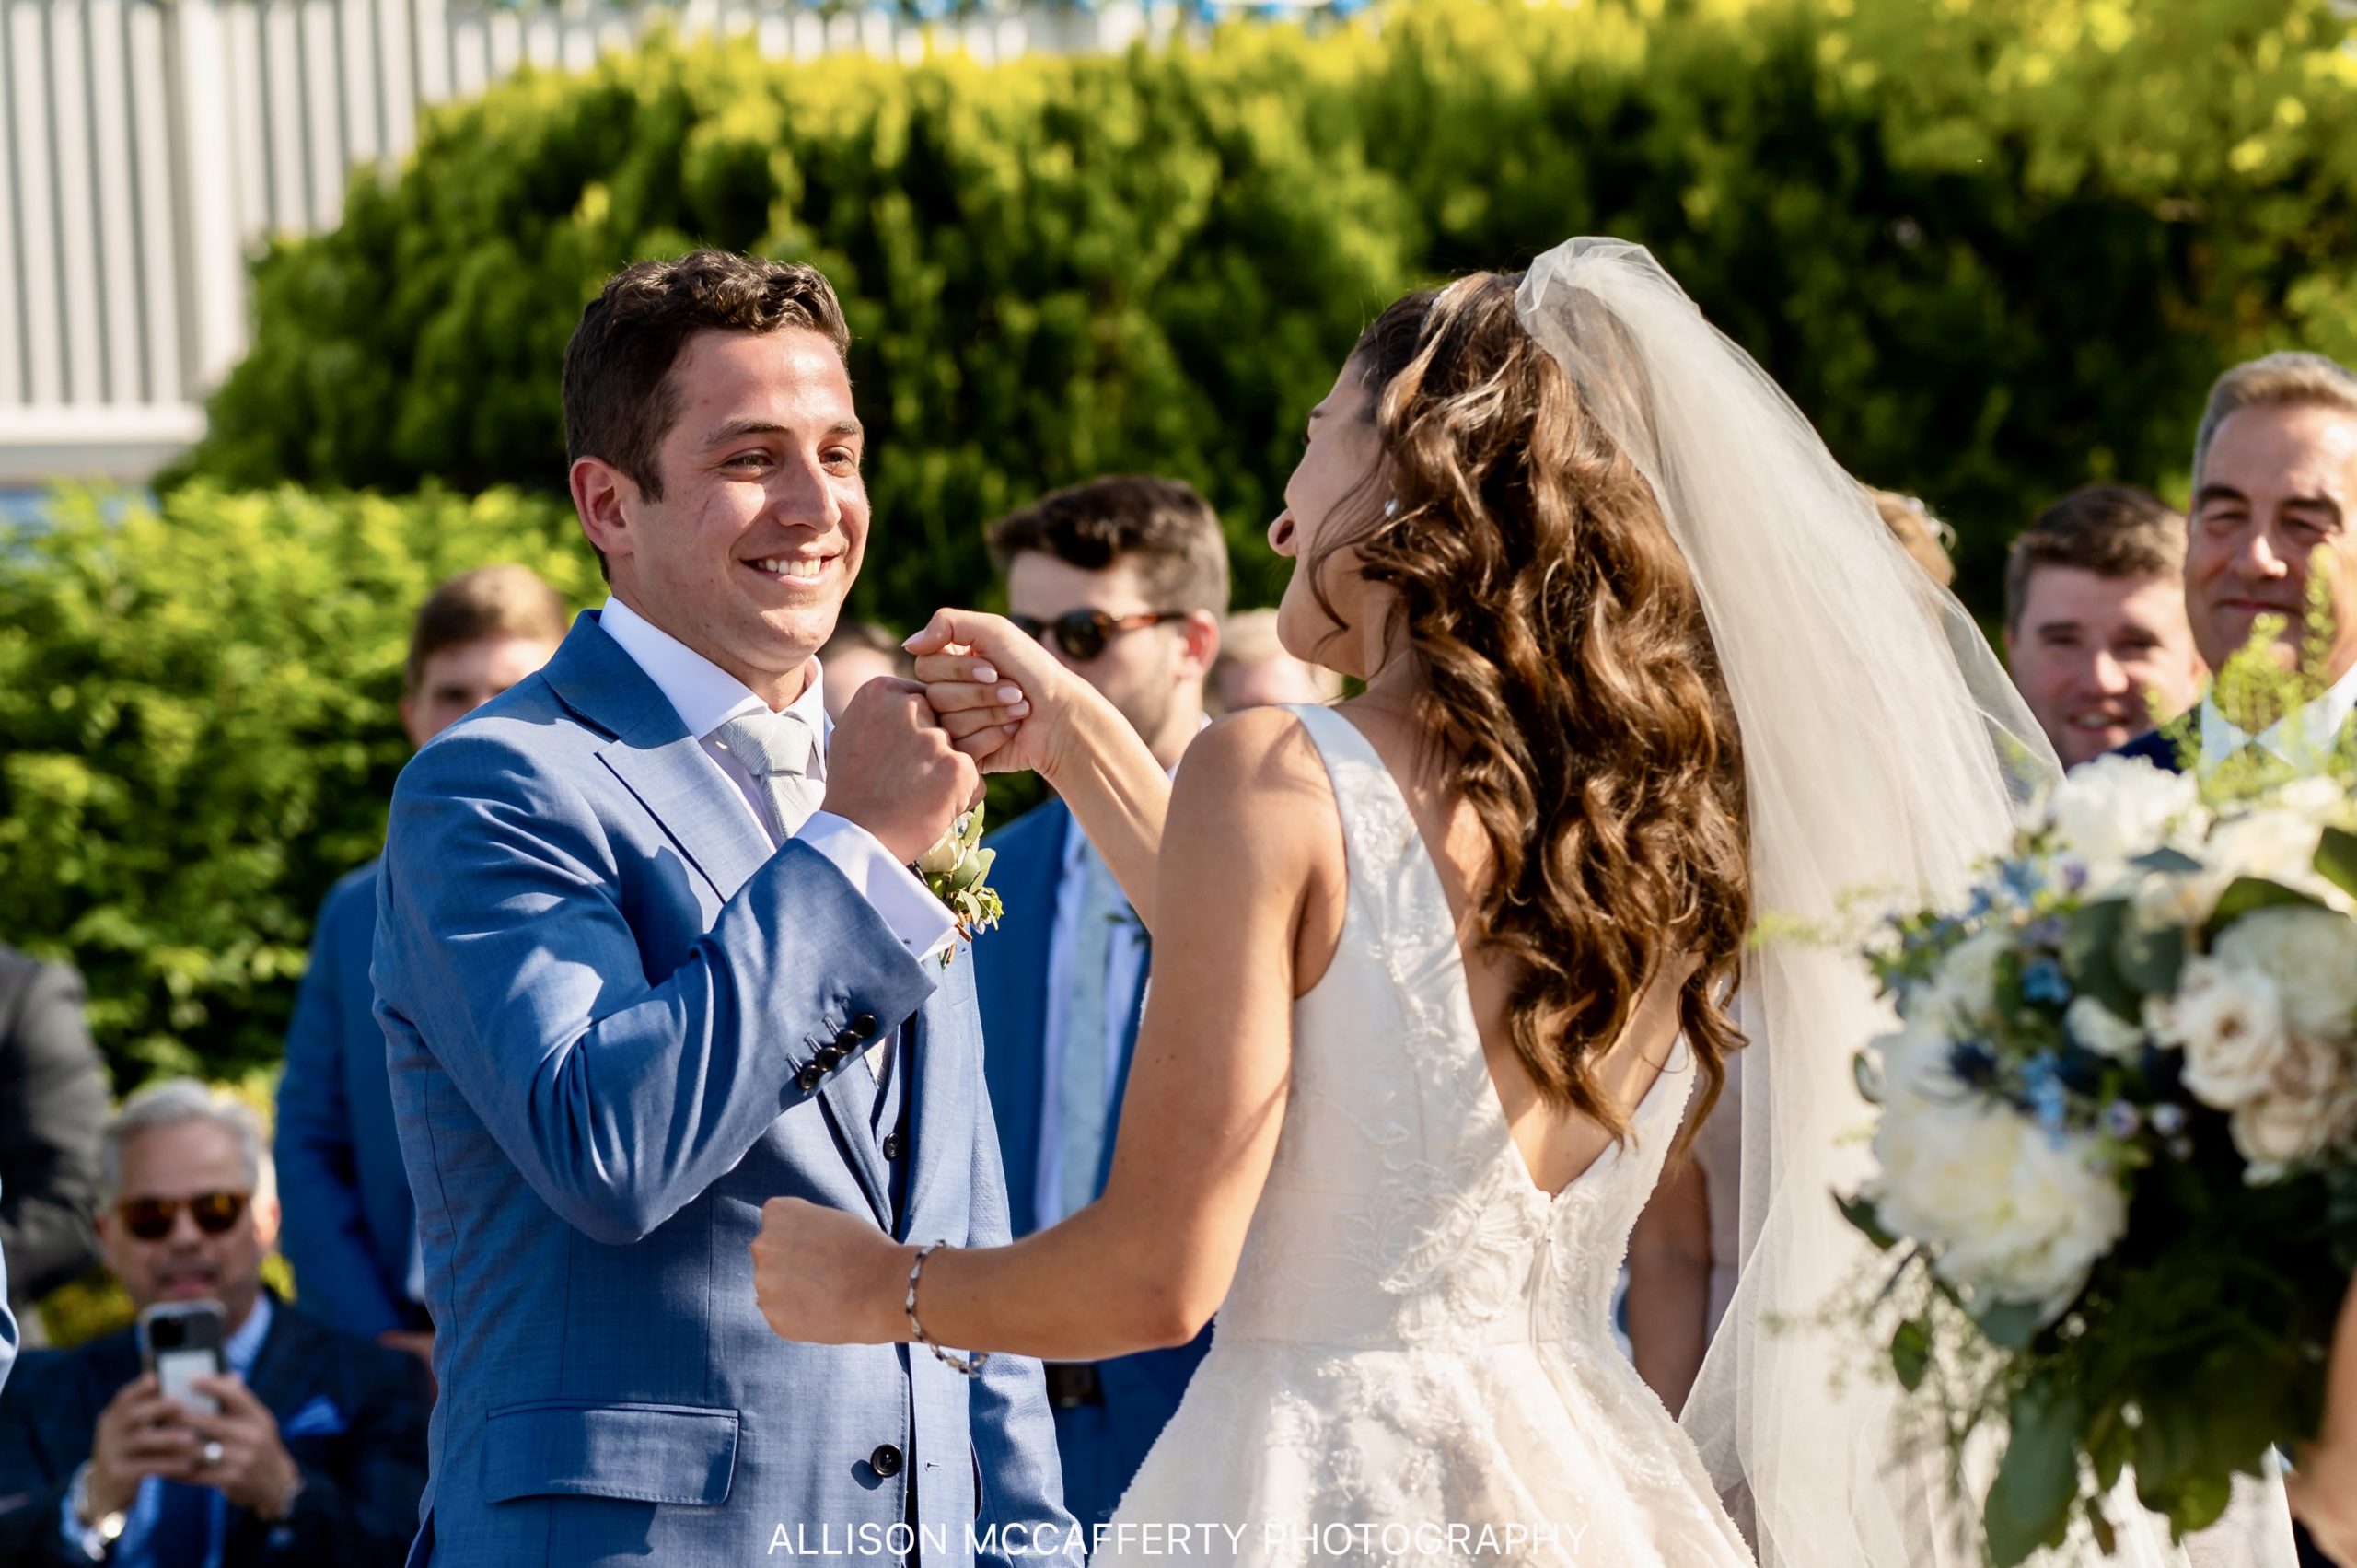 Outdoor wedding ceremony at Crystal Point Yacht Club in Point Pleasant NJ